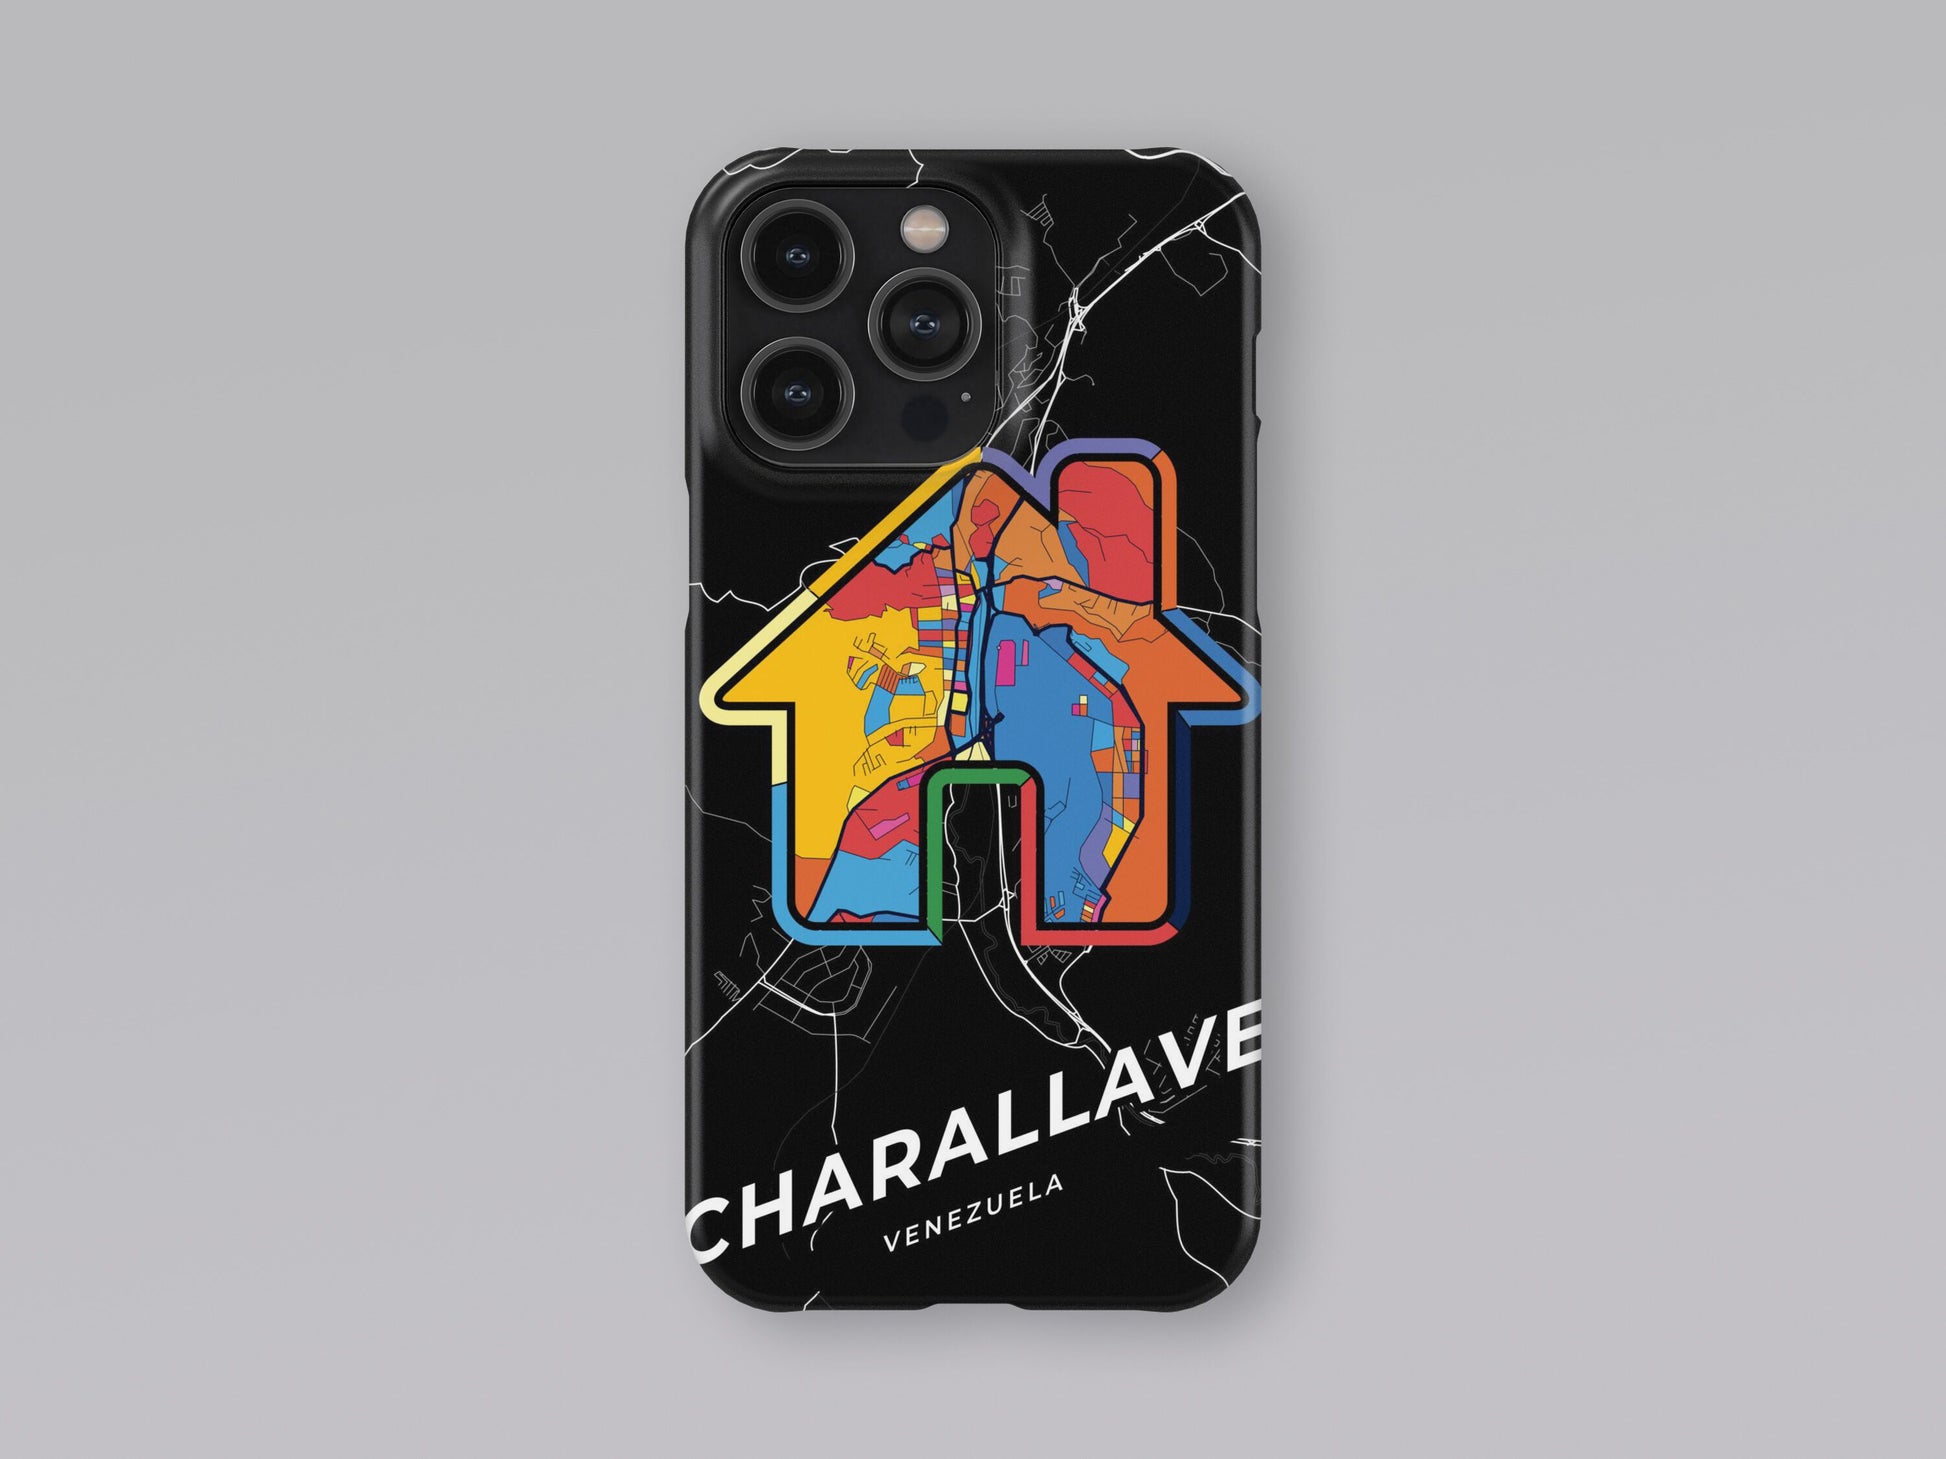 Charallave Venezuela slim phone case with colorful icon. Birthday, wedding or housewarming gift. Couple match cases. 3